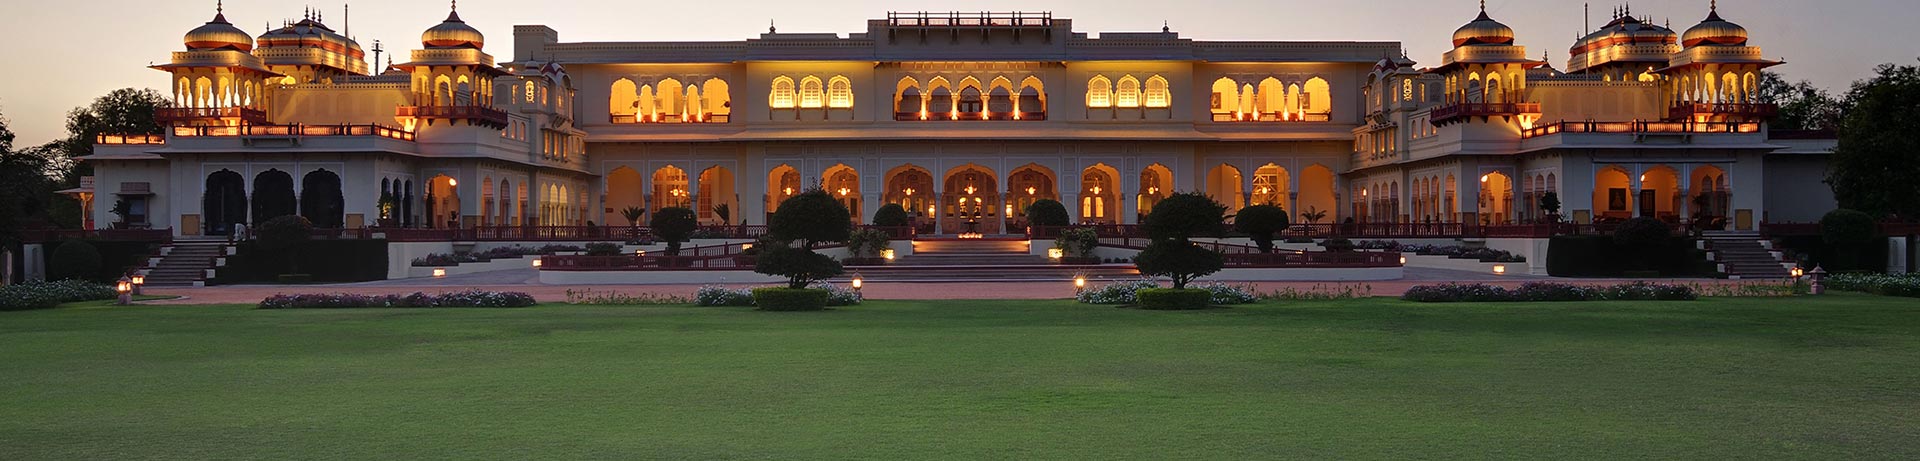 Jaipur Travel Guide, Places to visit, Tourist places in Jaipur